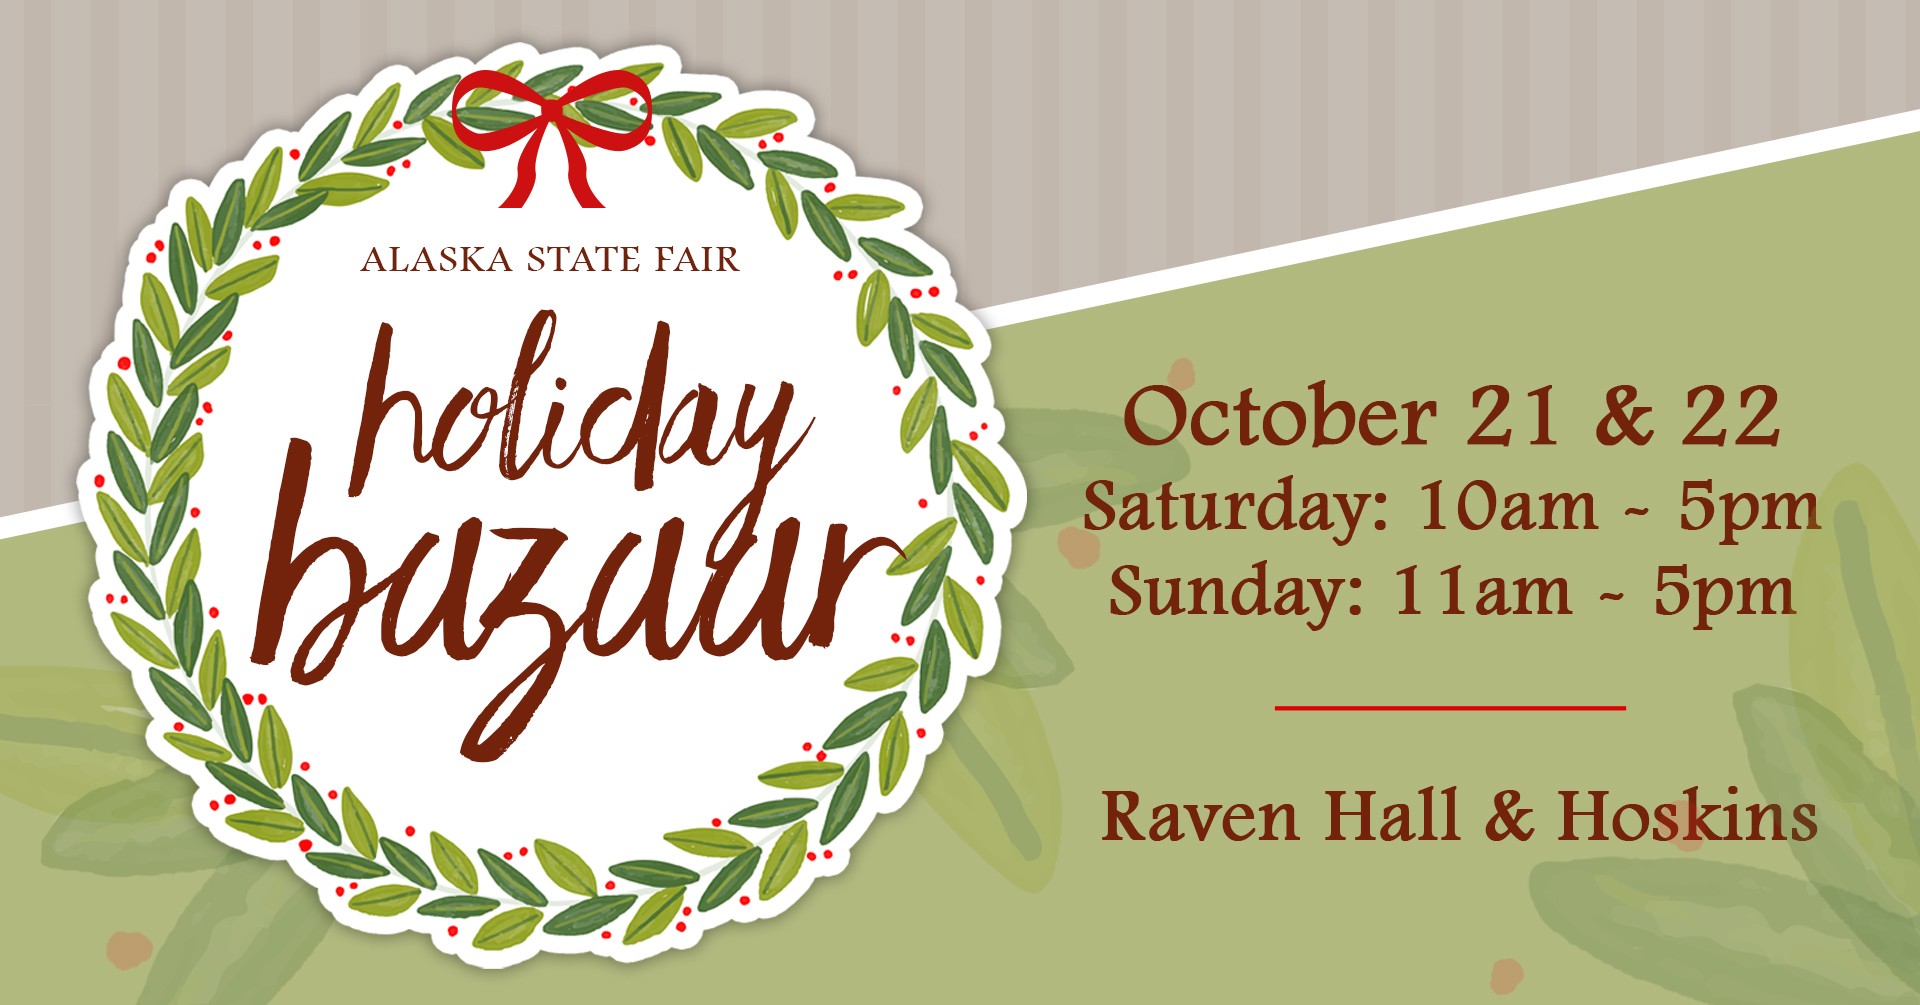 Event flyer for Holiday Bazaar at Alaska State Fair Grounds